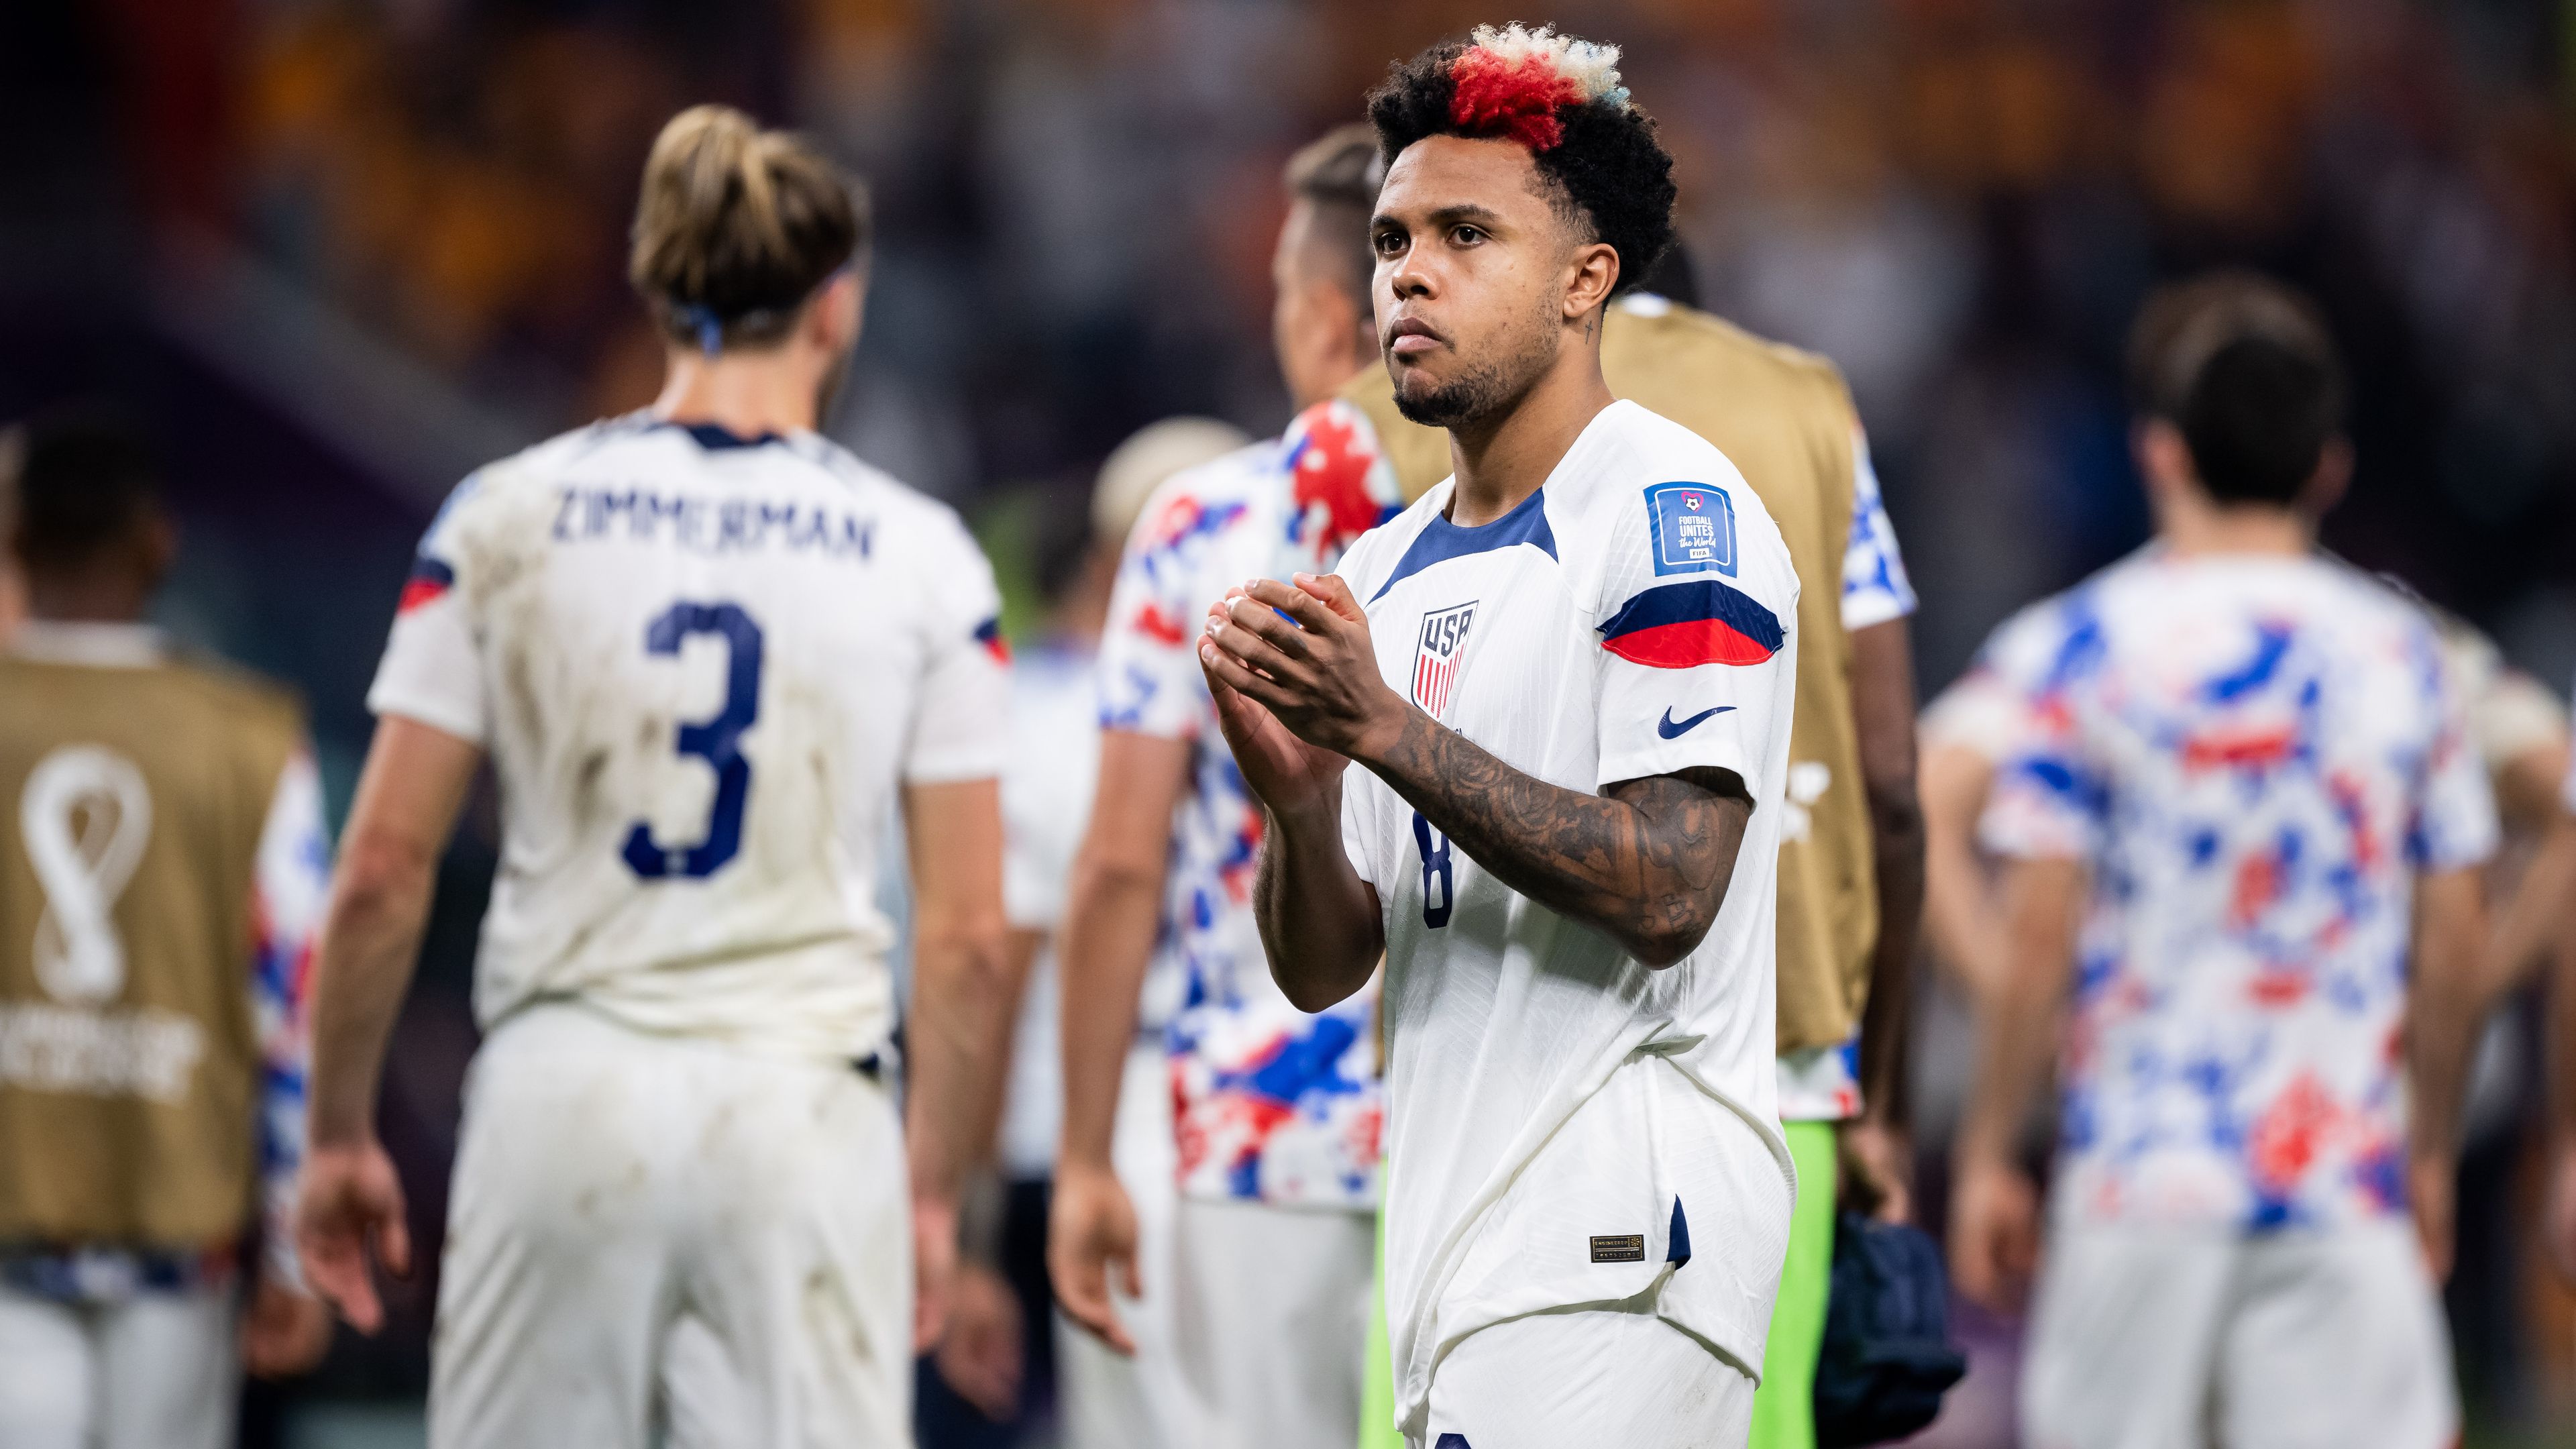 Weston McKennie of USA looks dejected after the FIFA World Cup loss to Netherlands. (Photo by Marvin Ibo Guengoer - GES Sportfoto/Getty Images)